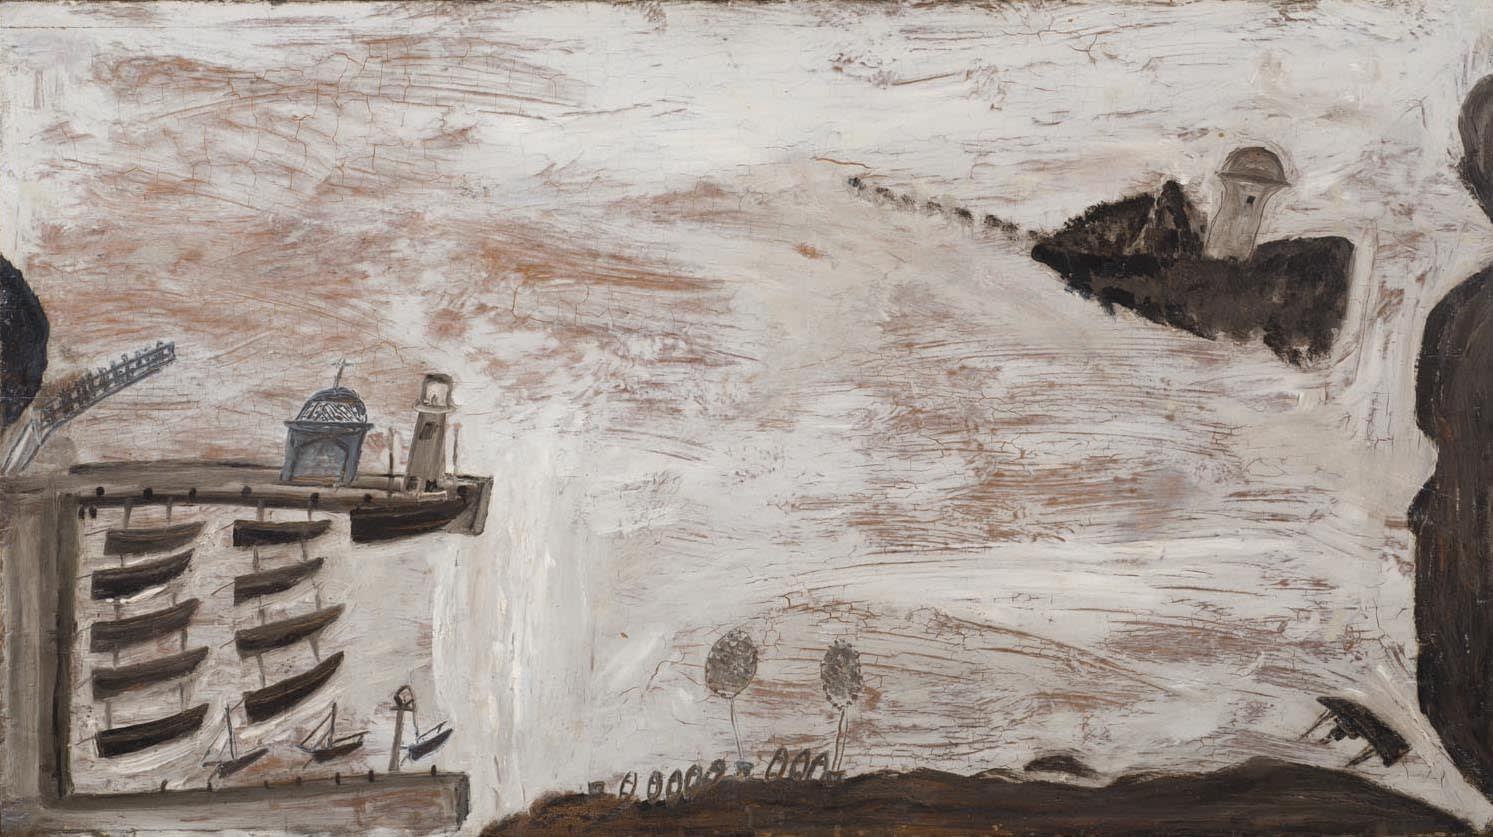 Alfred WALLIS (1855 – 1942) St Ives Harbour, c.1936 Oil on panel 19 x 34 inches / 48.3 x 86.3 cm